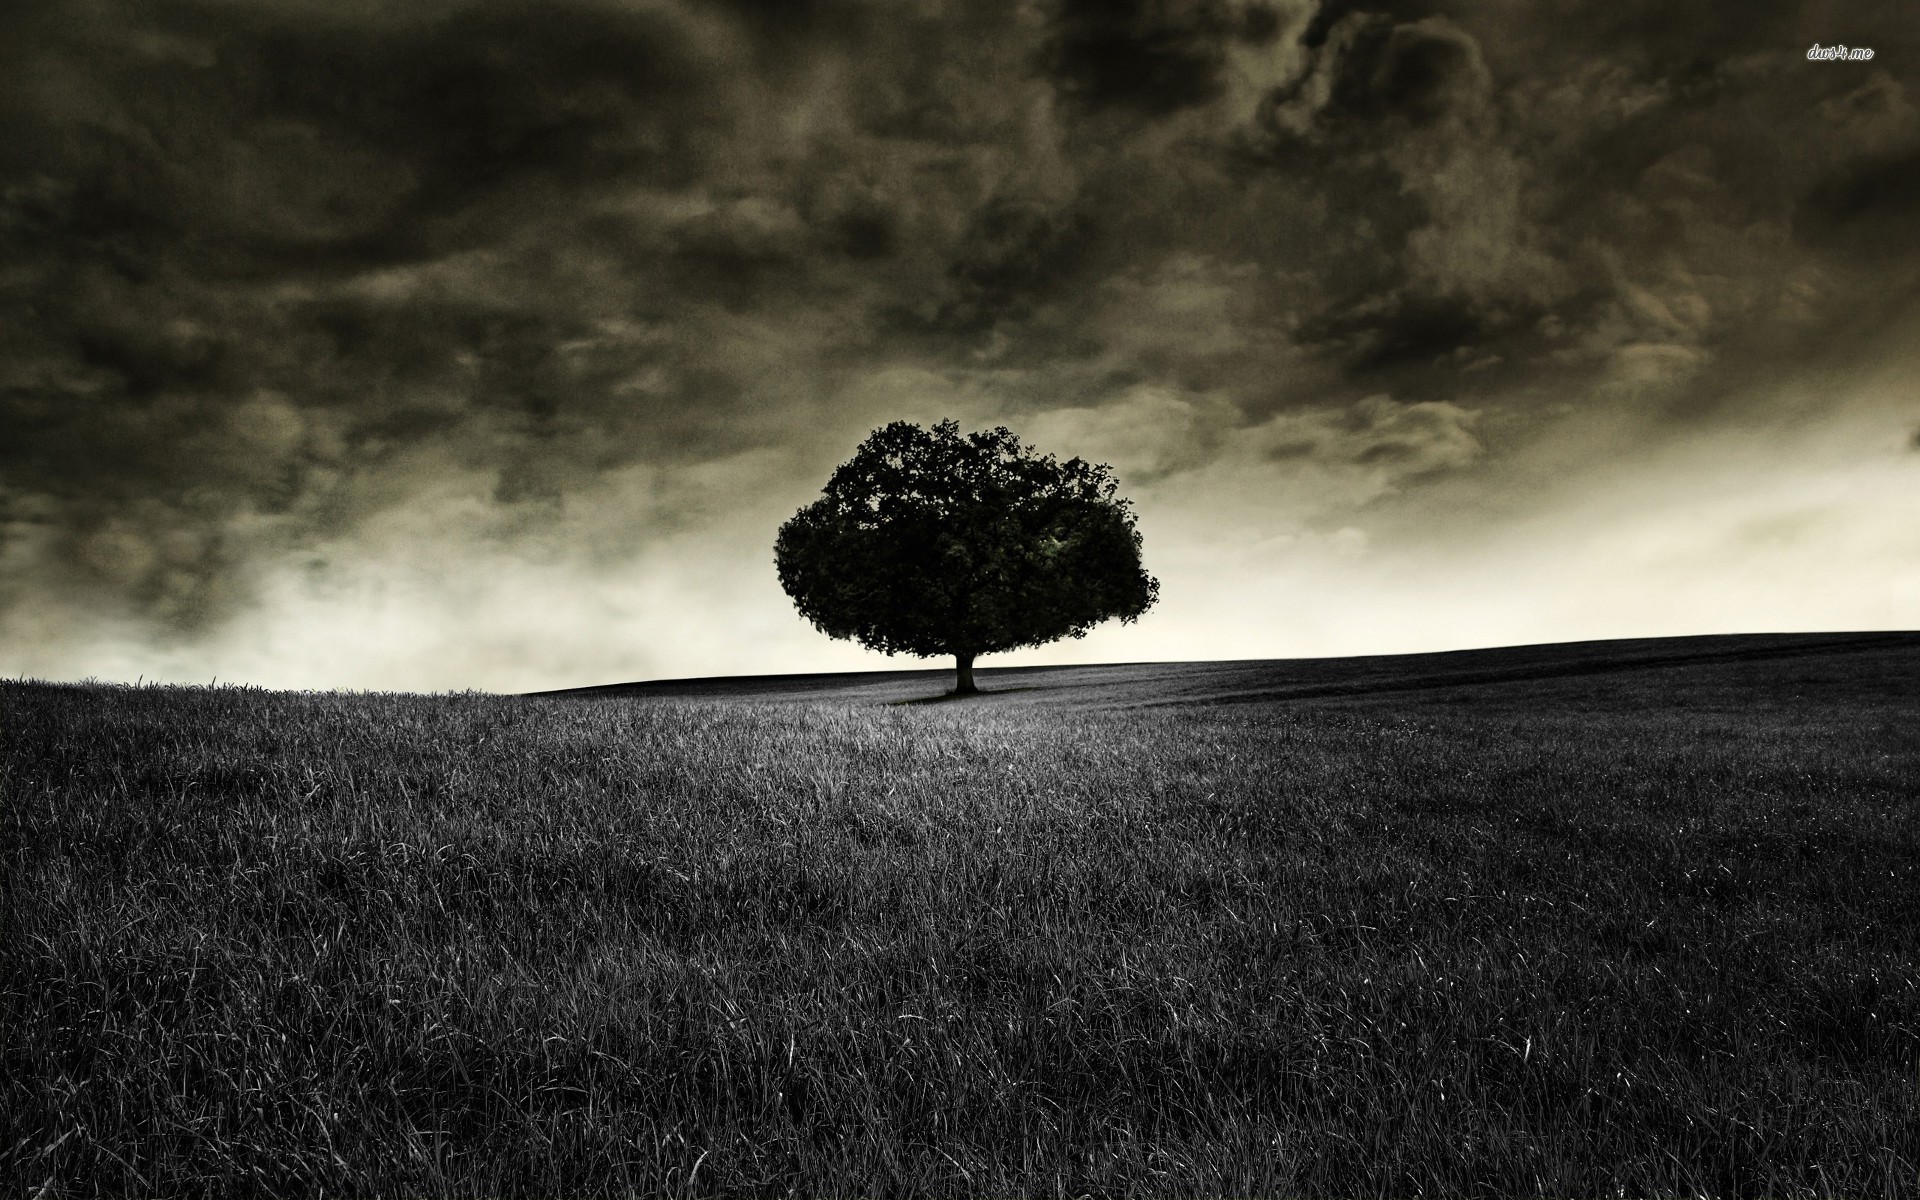 Dark lonely tree wallpaper - Photography wallpapers - #10250